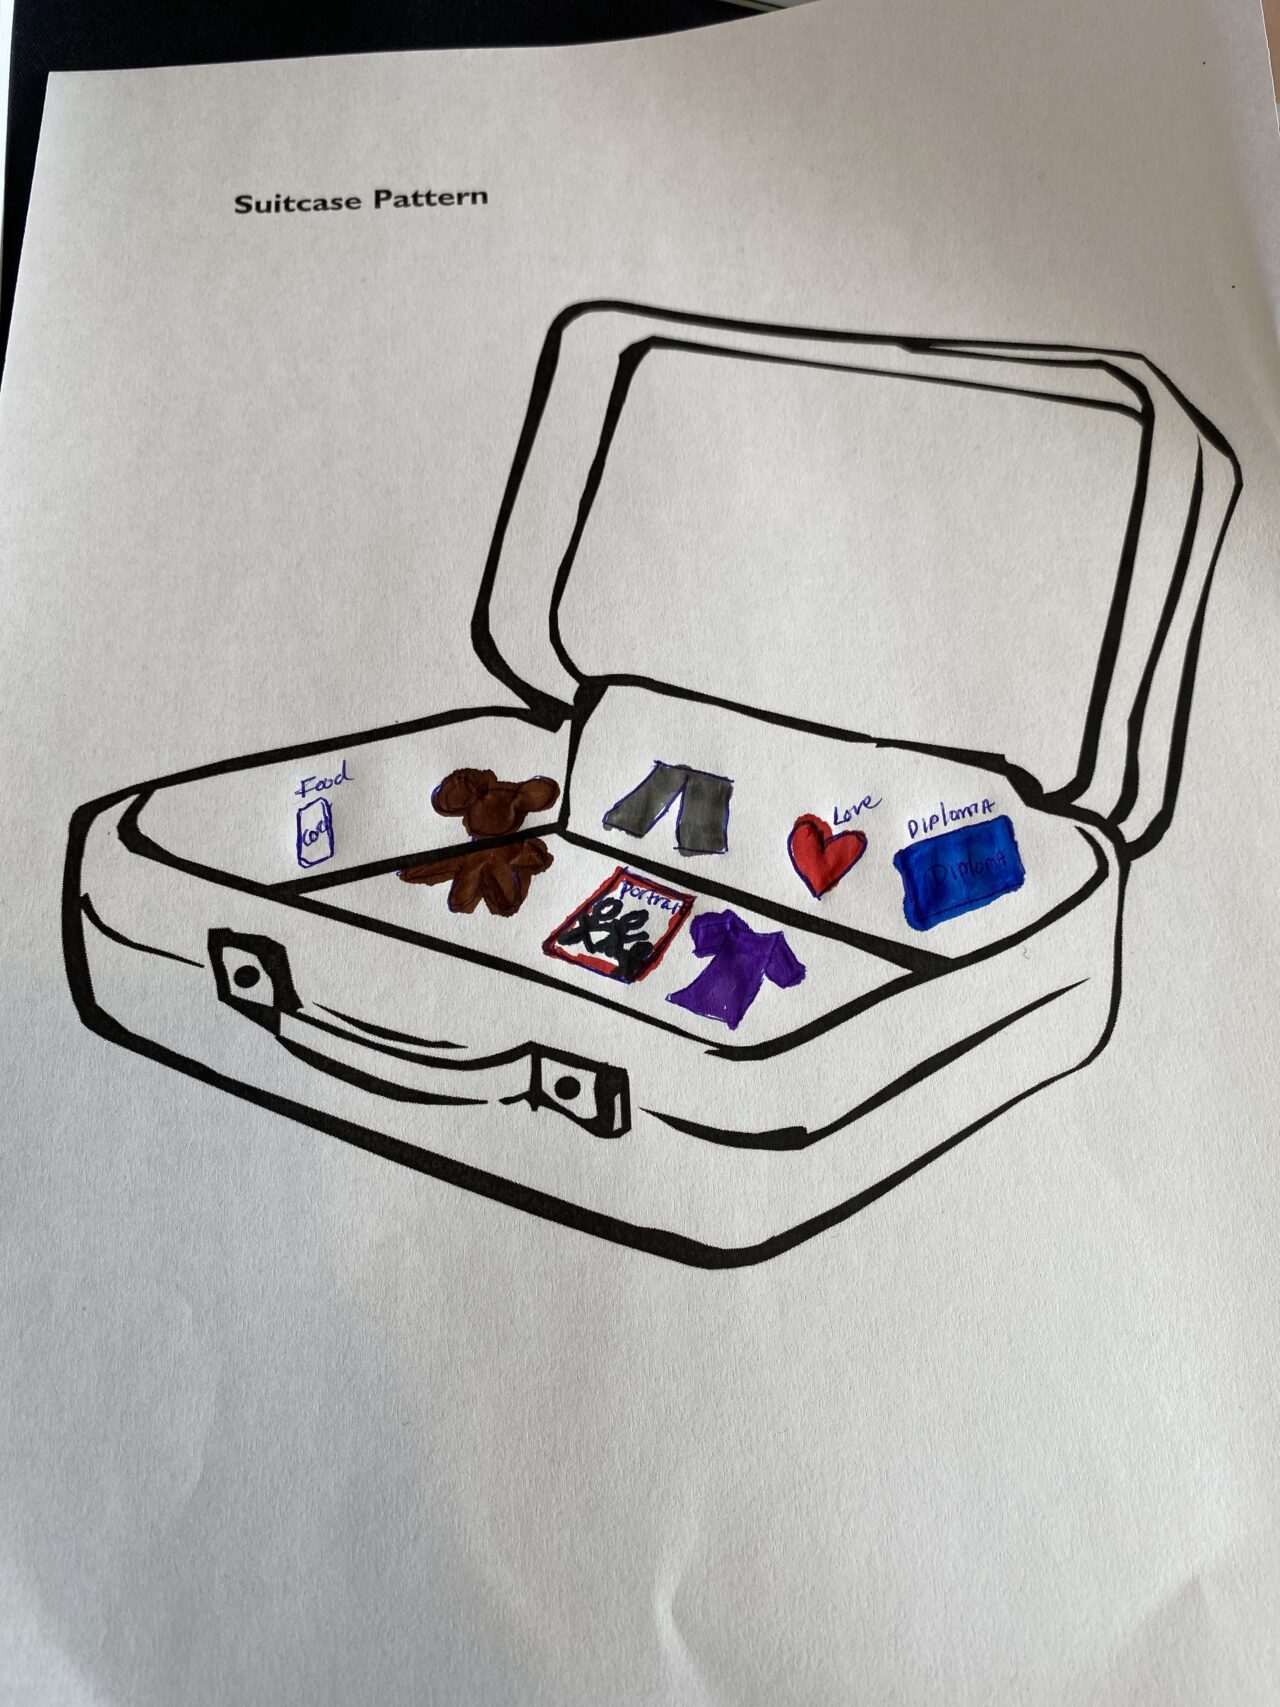 A drawing of a suitcase filled with drawings of clothing, food, a diploma, and a heart representing the love of a mother or caregiver.